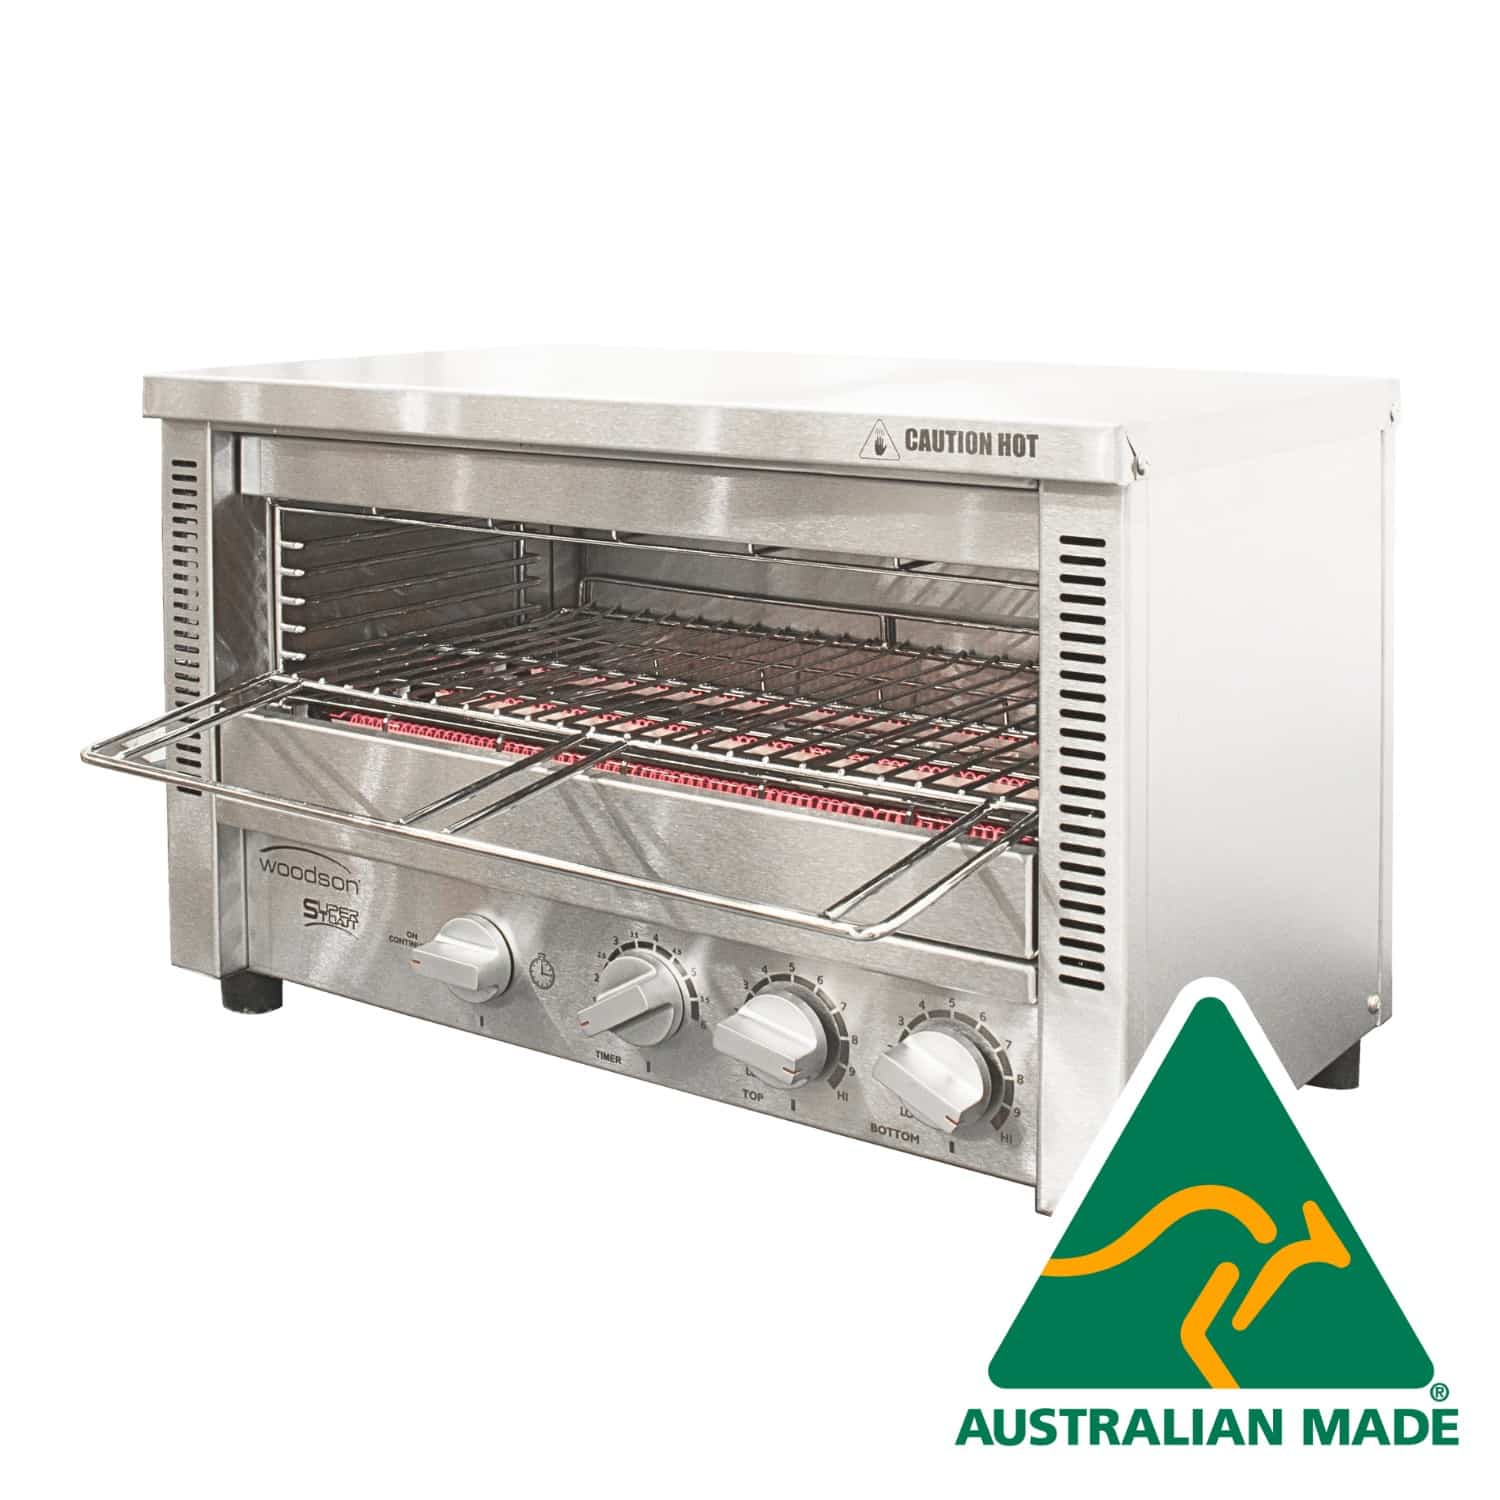 Woodson Griller 8 Slices, independently regulated top and bottom heating elements